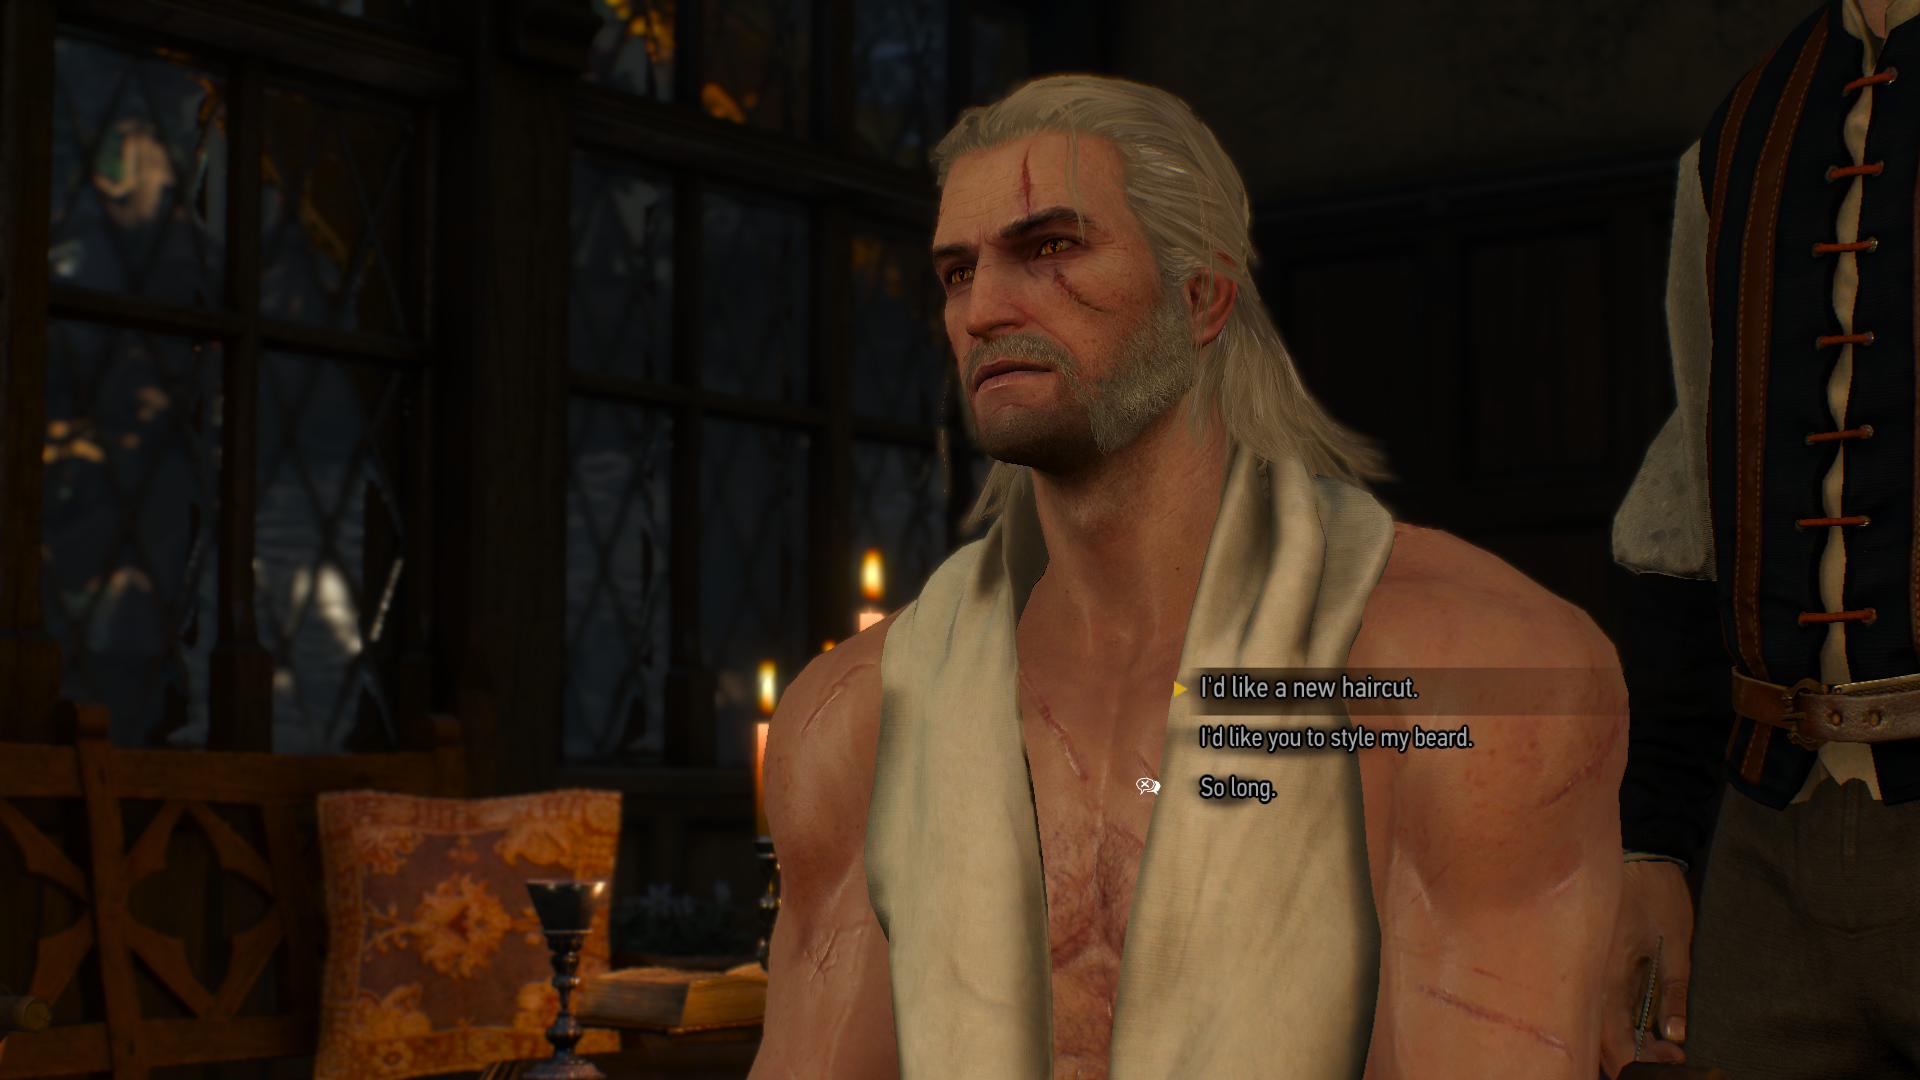 The Witcher 3’s Free DLC So Far: Monsters, Beards, And A Pretty Dress